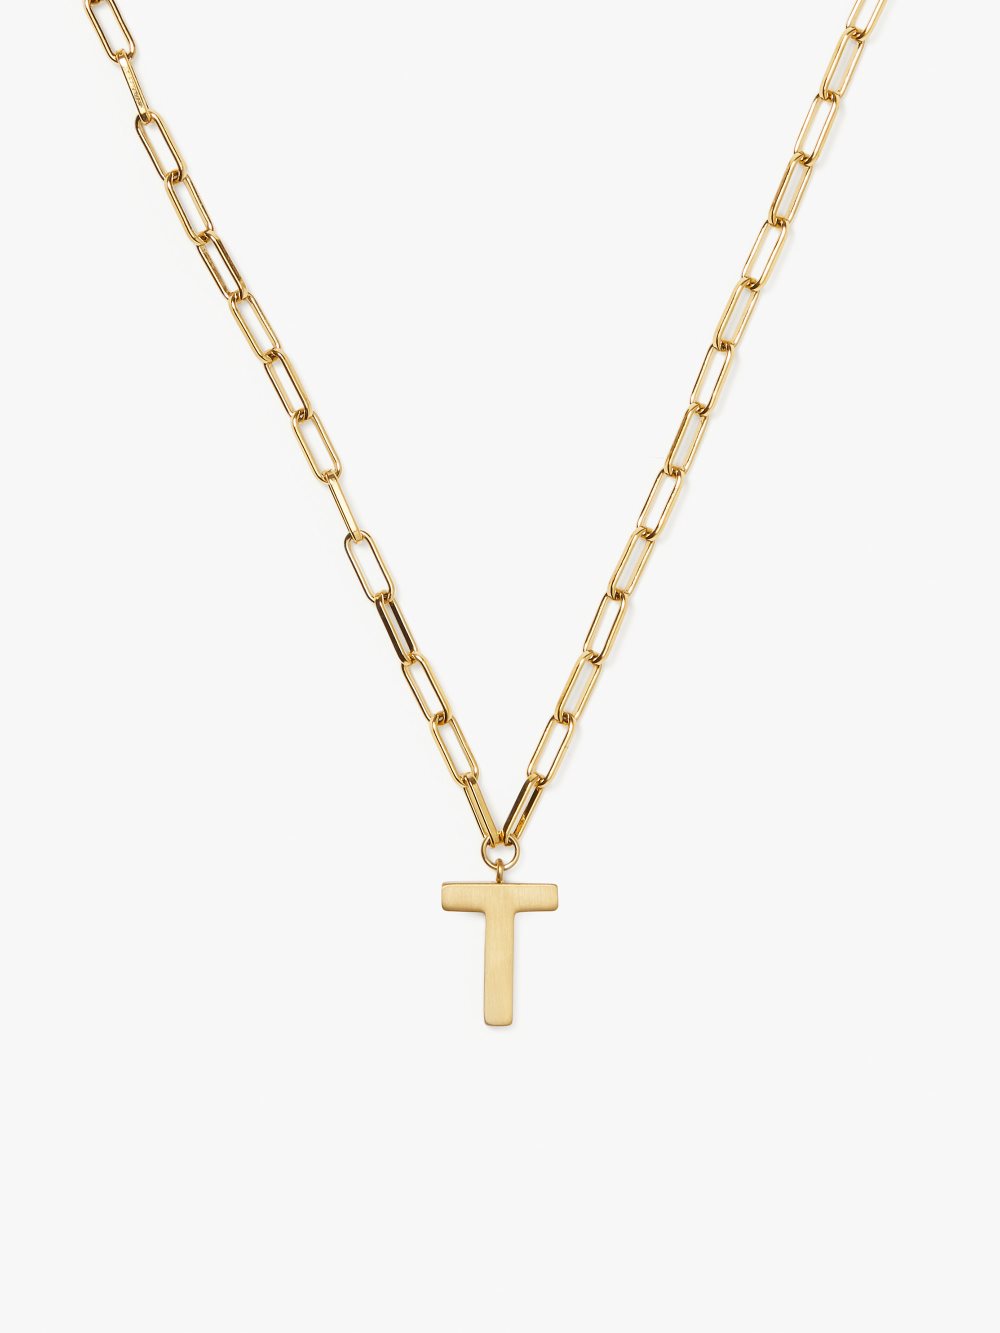 Women's gold. t initial this pendant | Kate Spade